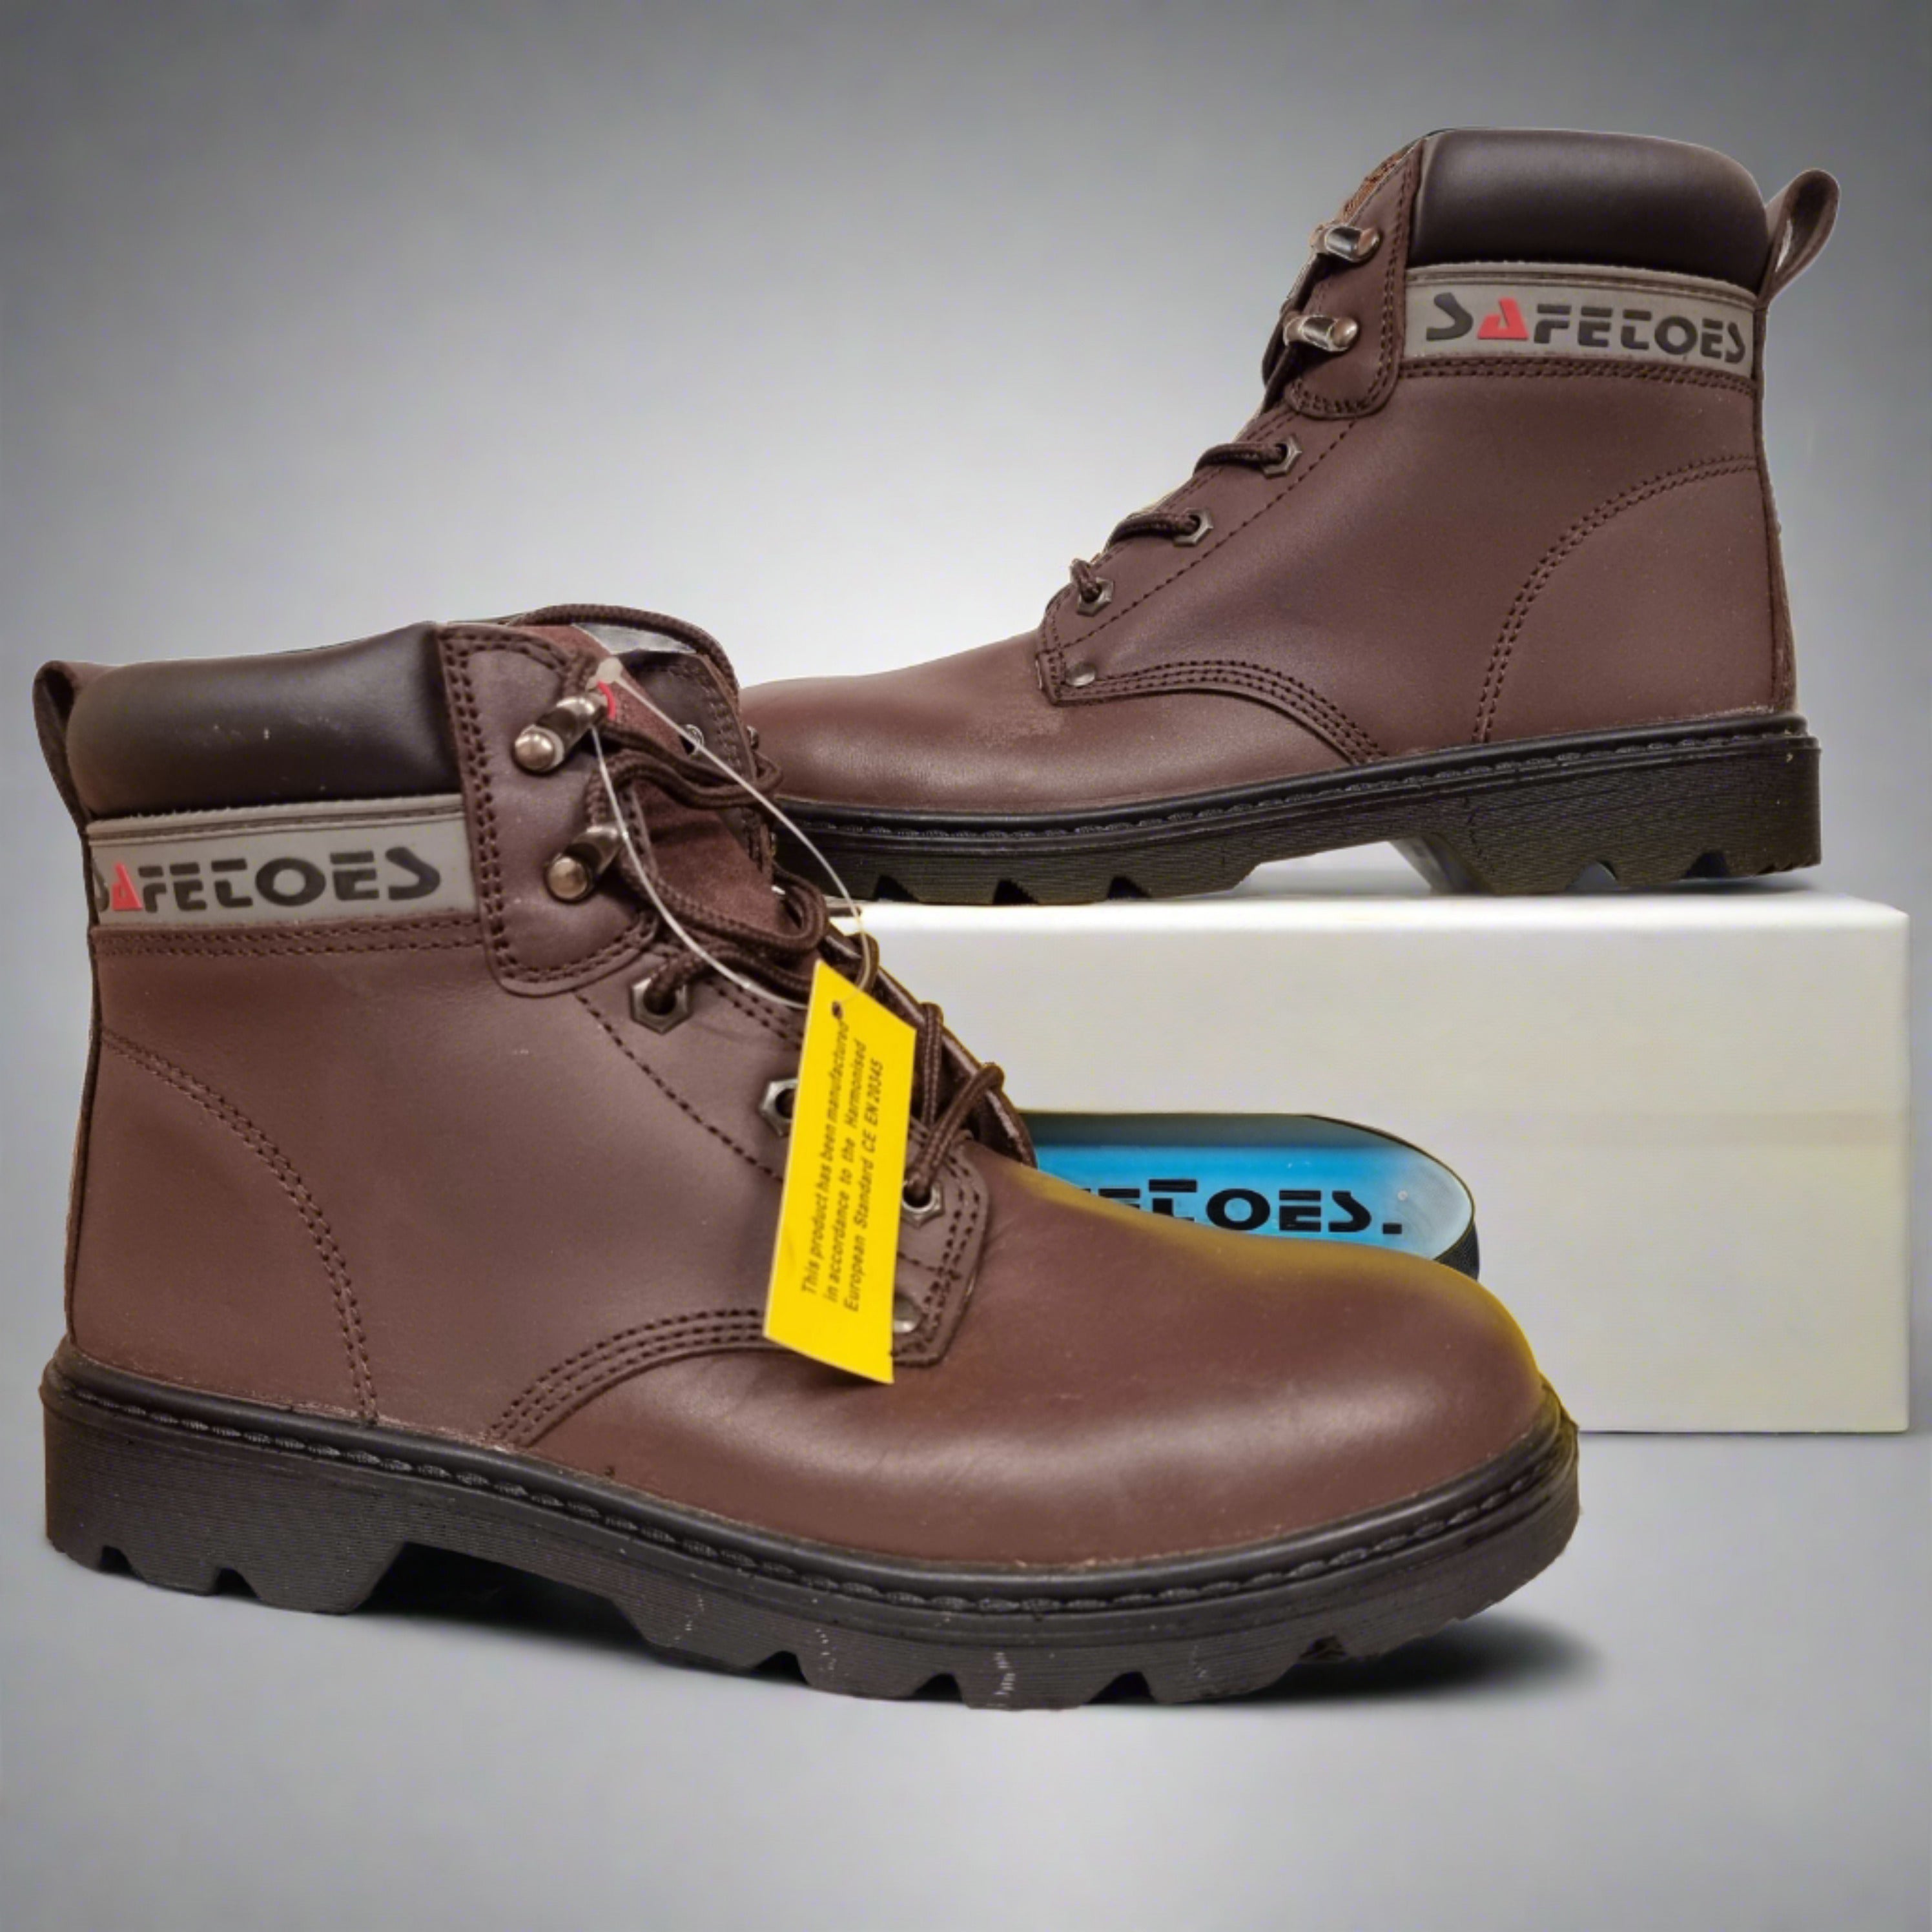 Safetoes S3002 Brown Leather Derby Safety Steel Toe Boots - UK Size 7